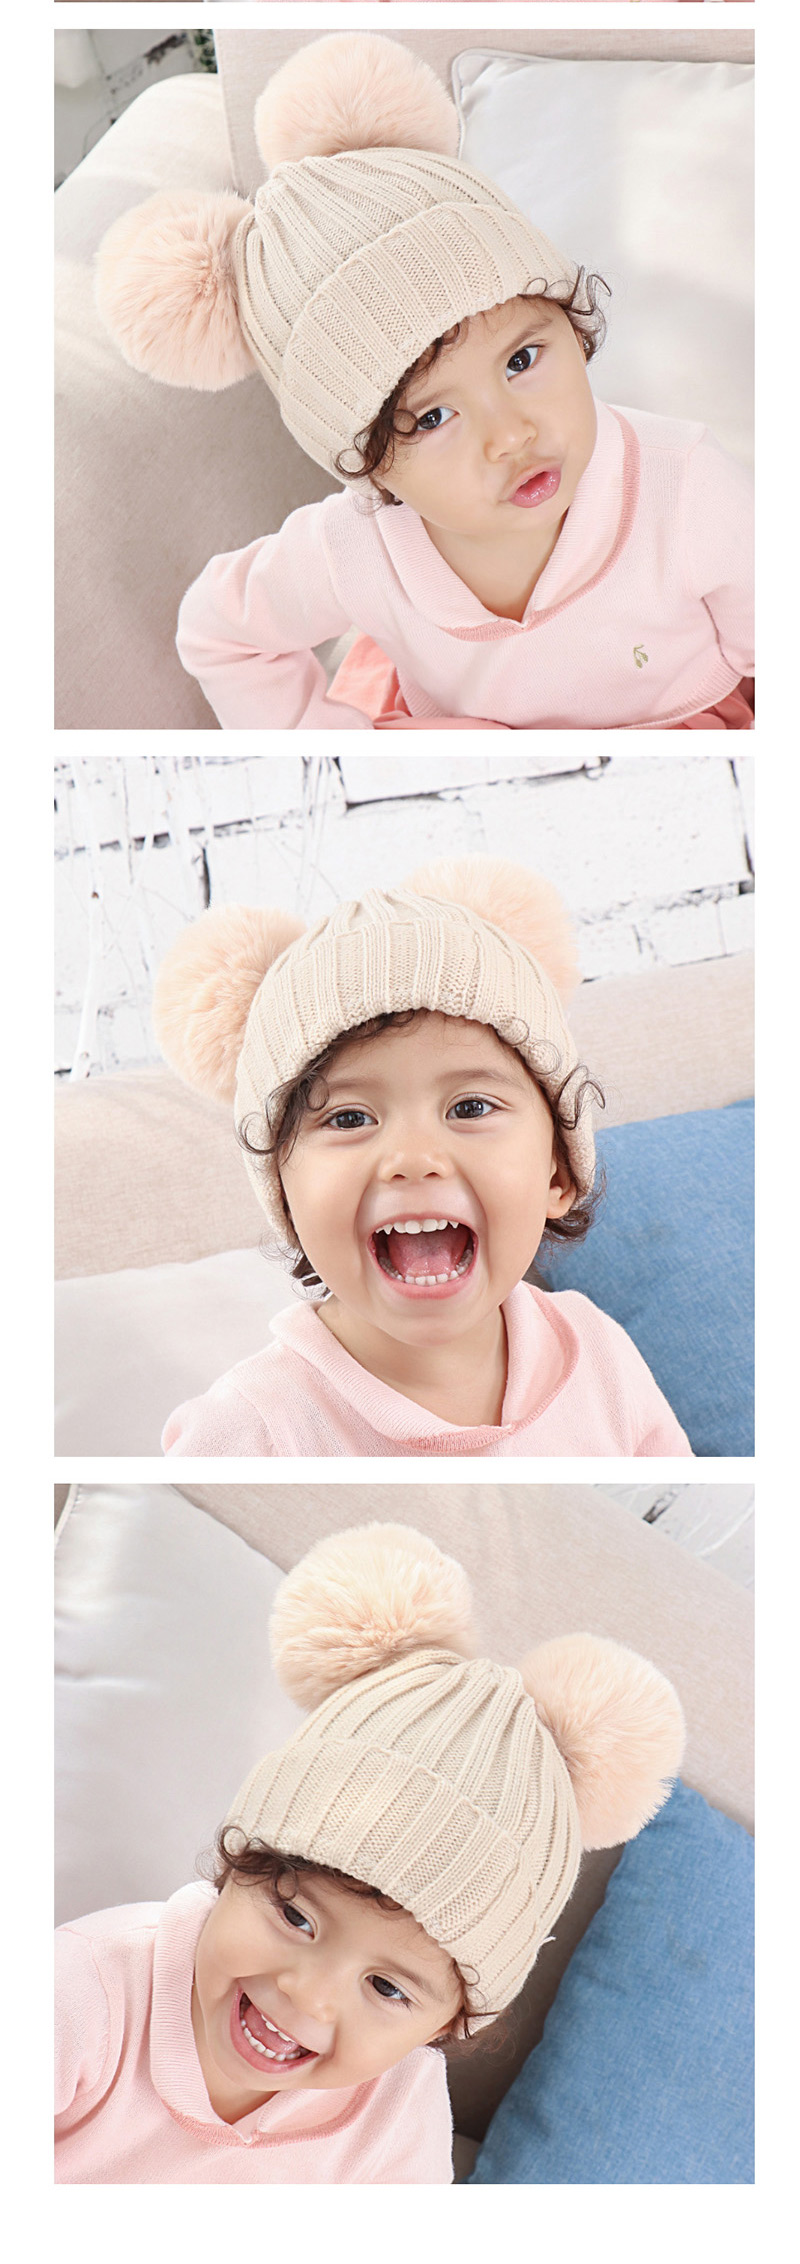 Fashion Black Threaded Double-hair Ball Knitted Baby Hat,Children